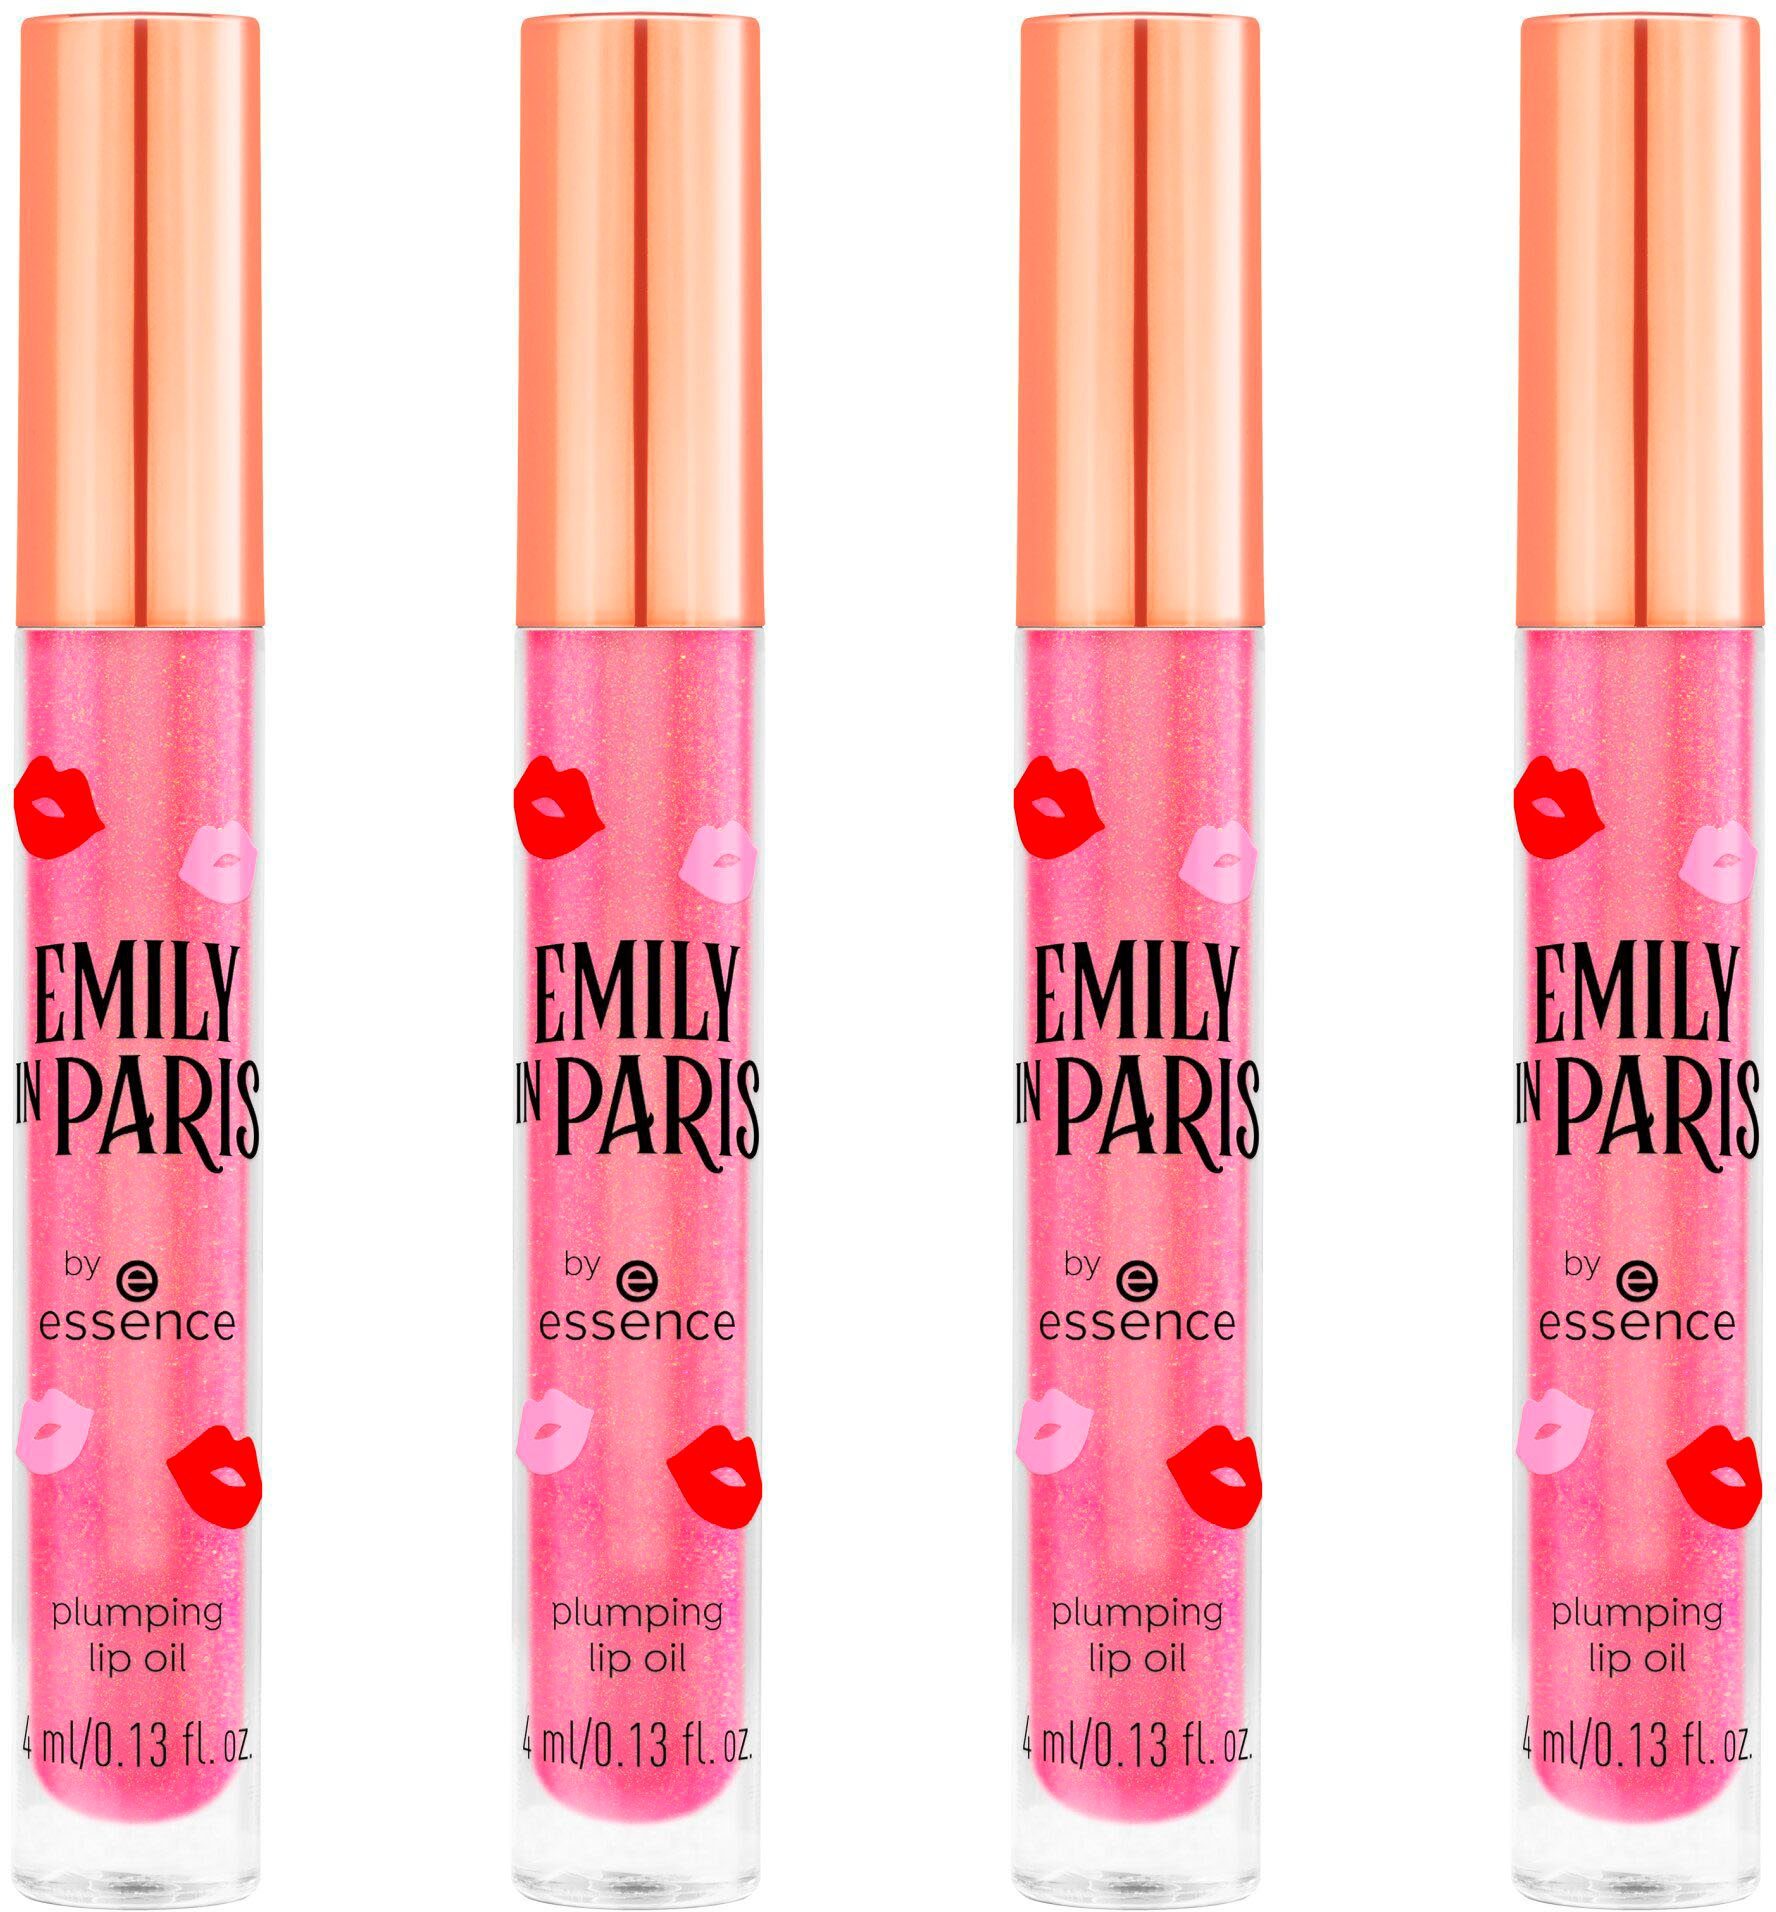 plumping essence Lipgloss EMILY oil Essence by IN lip PARIS